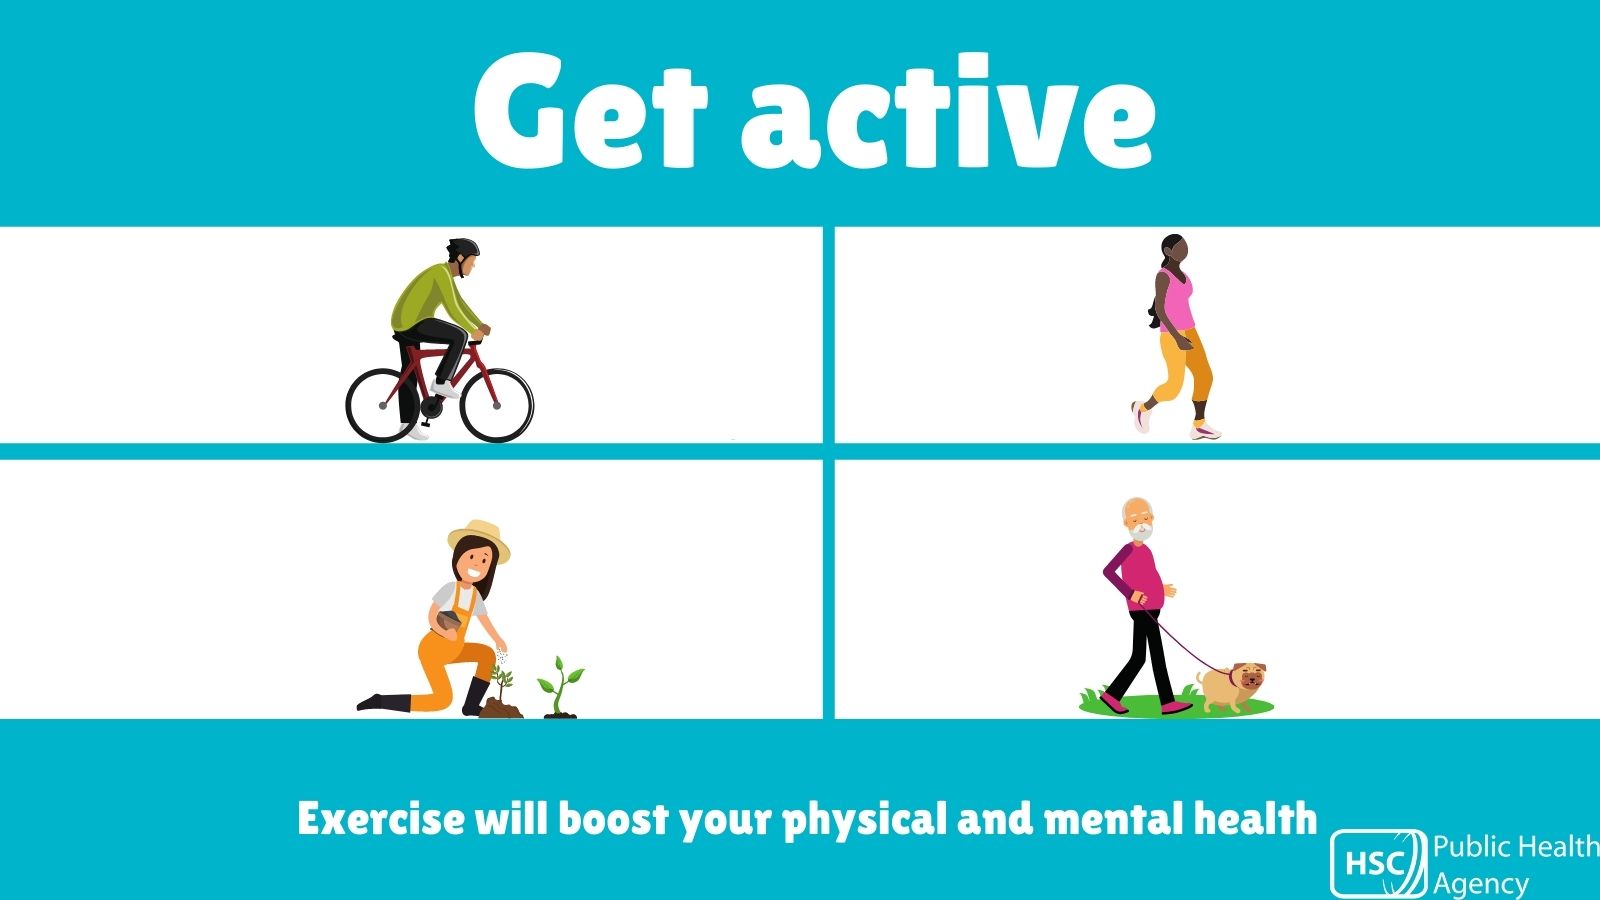 Physical Activity and Your Mental Health